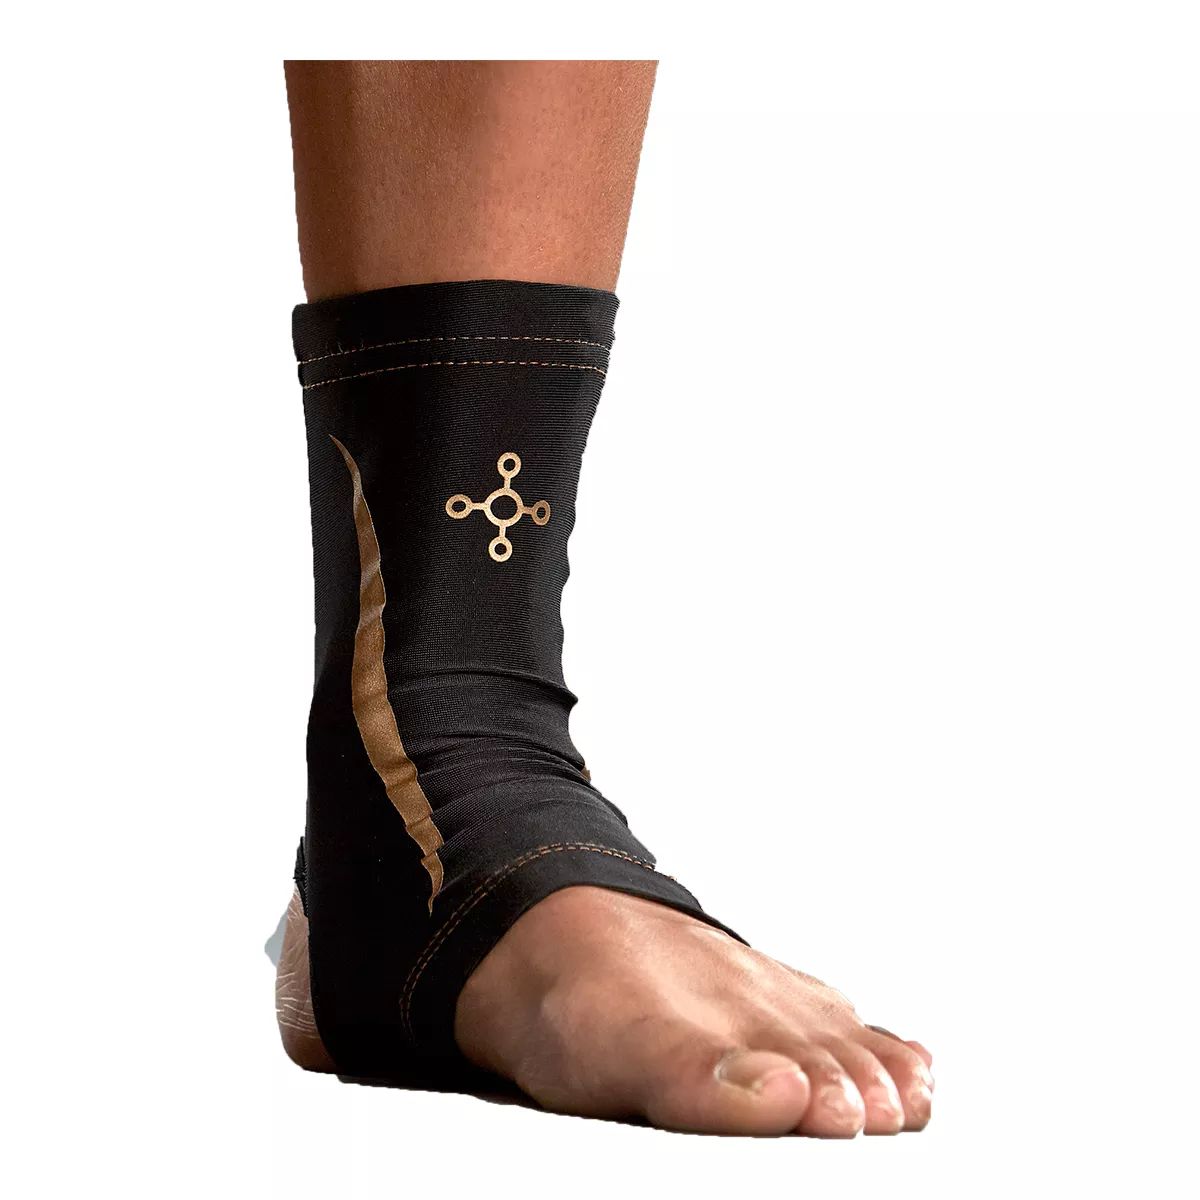 Tommie Copper Sport Compression Full Leg Sleeve Joint Pain Relief L/XL -  Granith